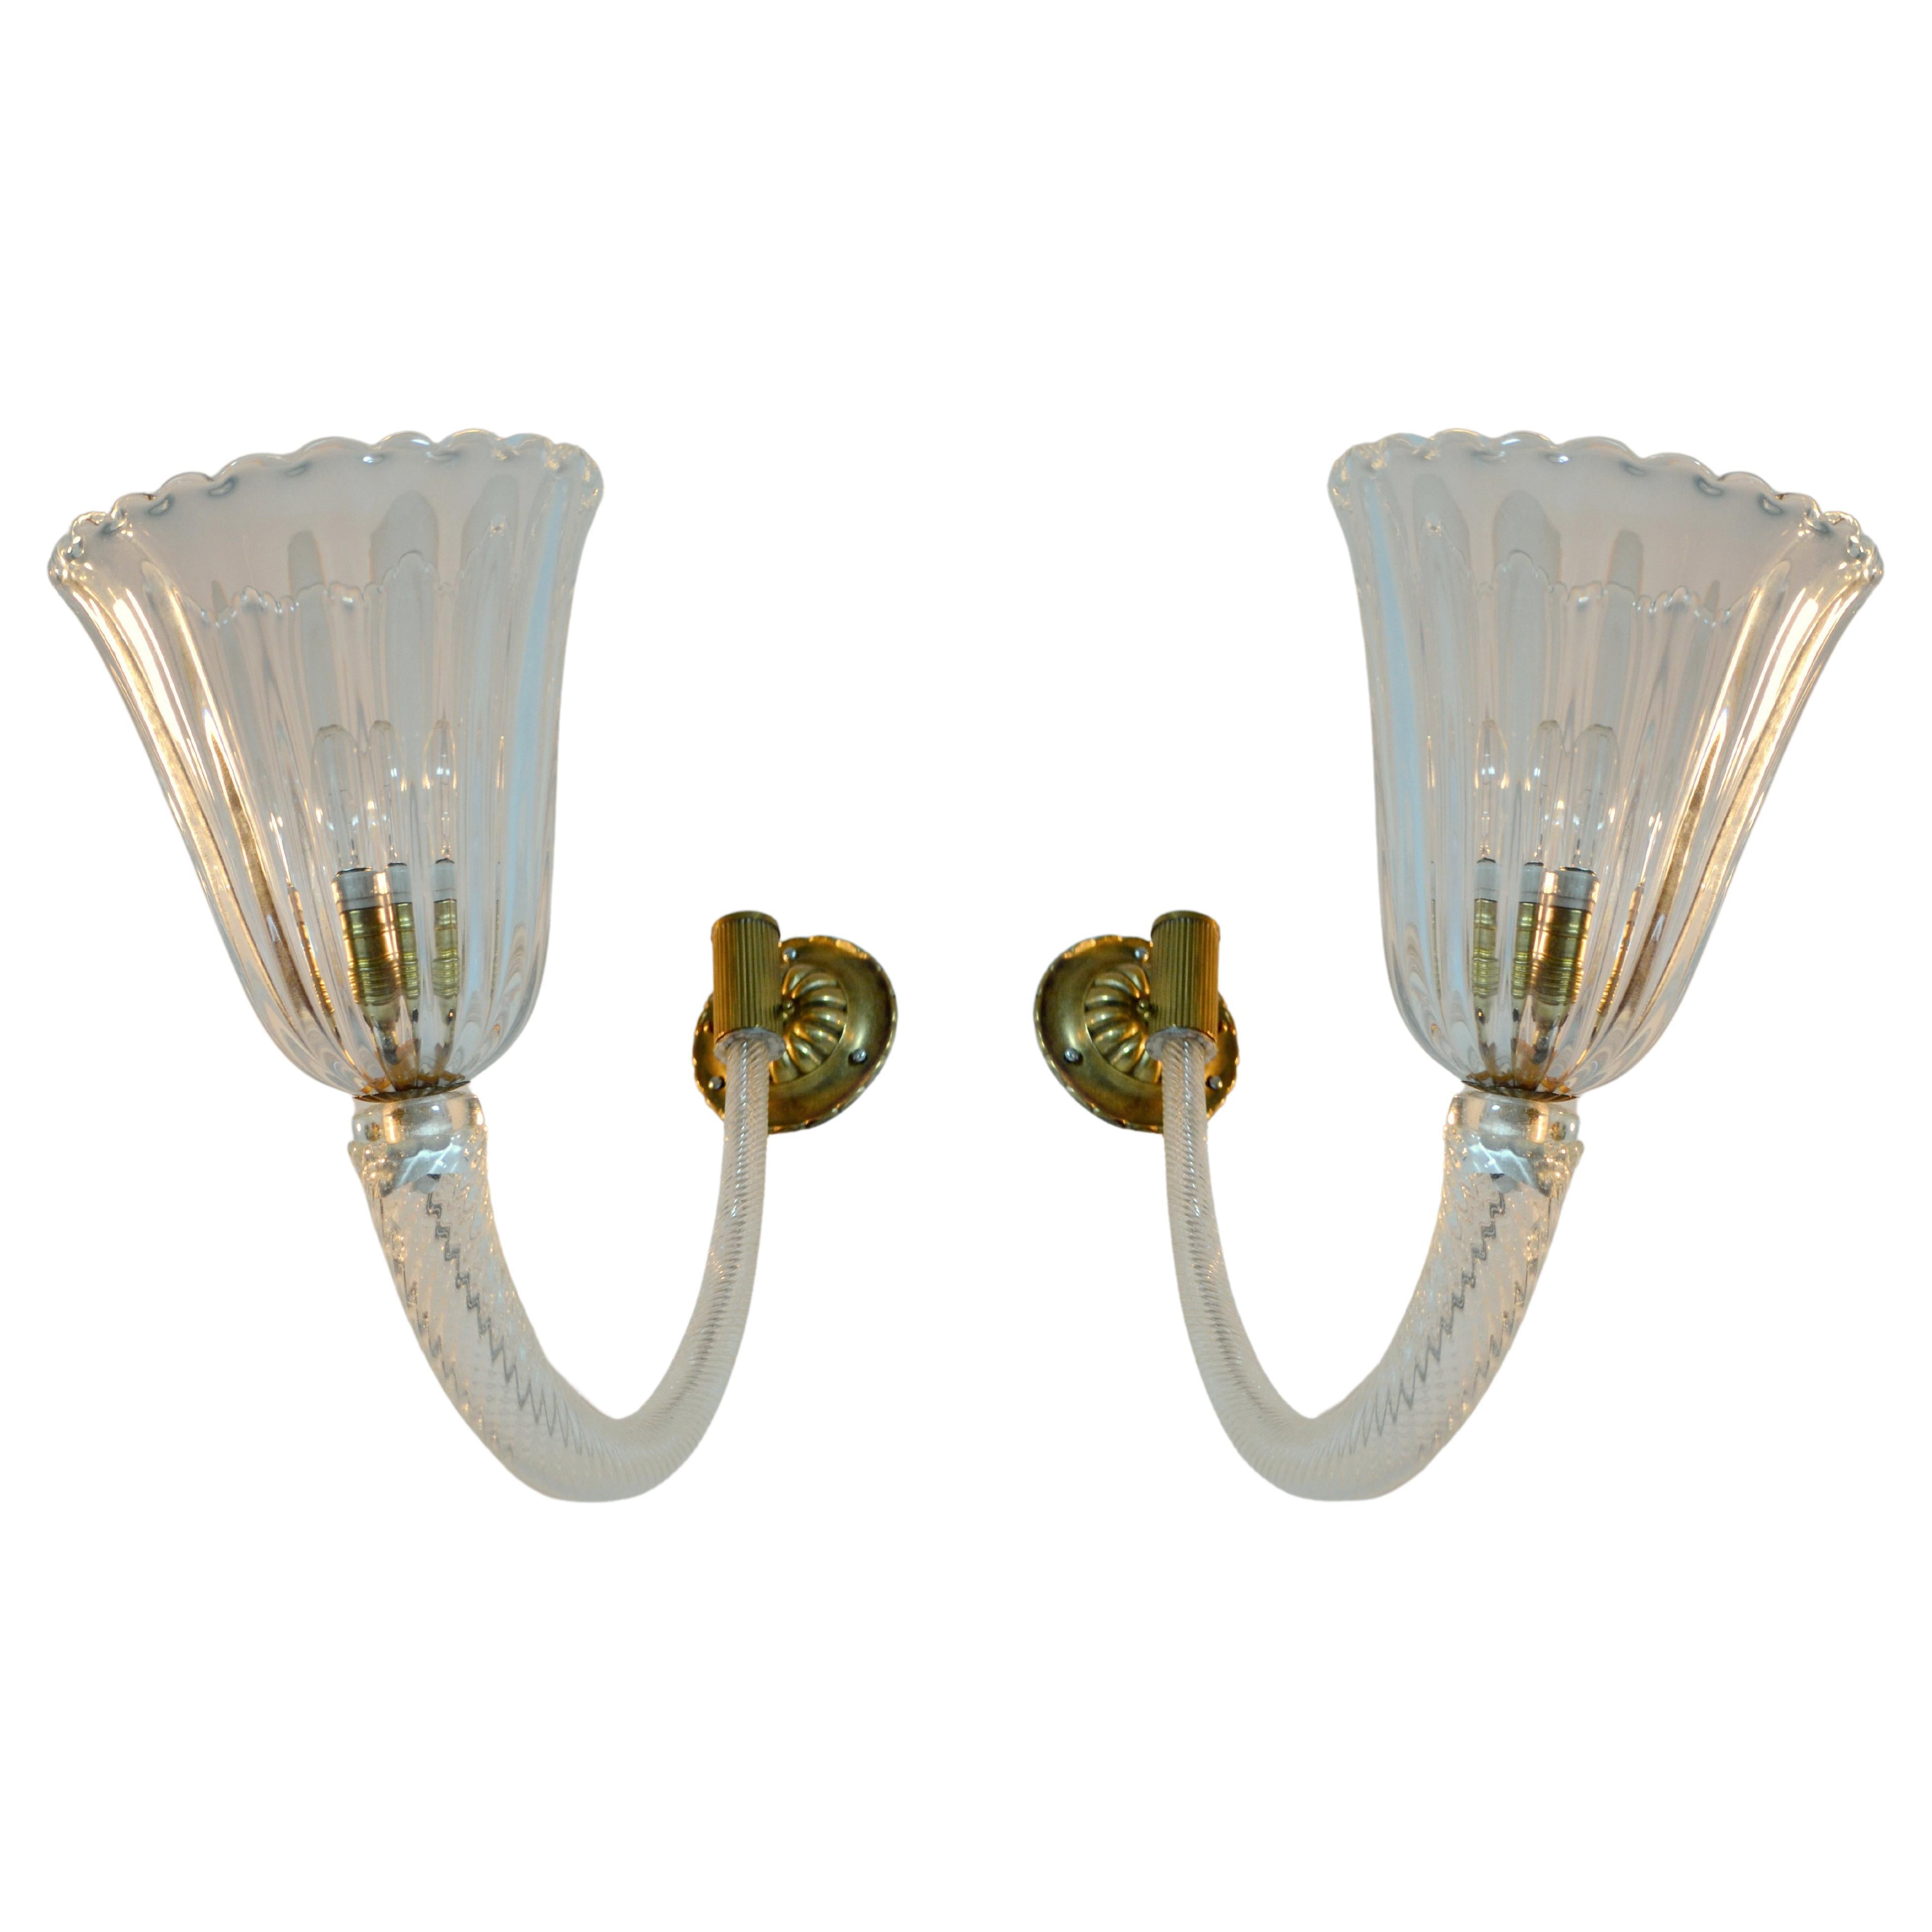 Pair of Mid-Century Murano wall sconces clear blown glass and brass 1940-50's, attributed to Barovier & Toso. The shades are connected to the wall by twisted glass bowed arms and can be applied as up - or downward lamps. The scallop shades like